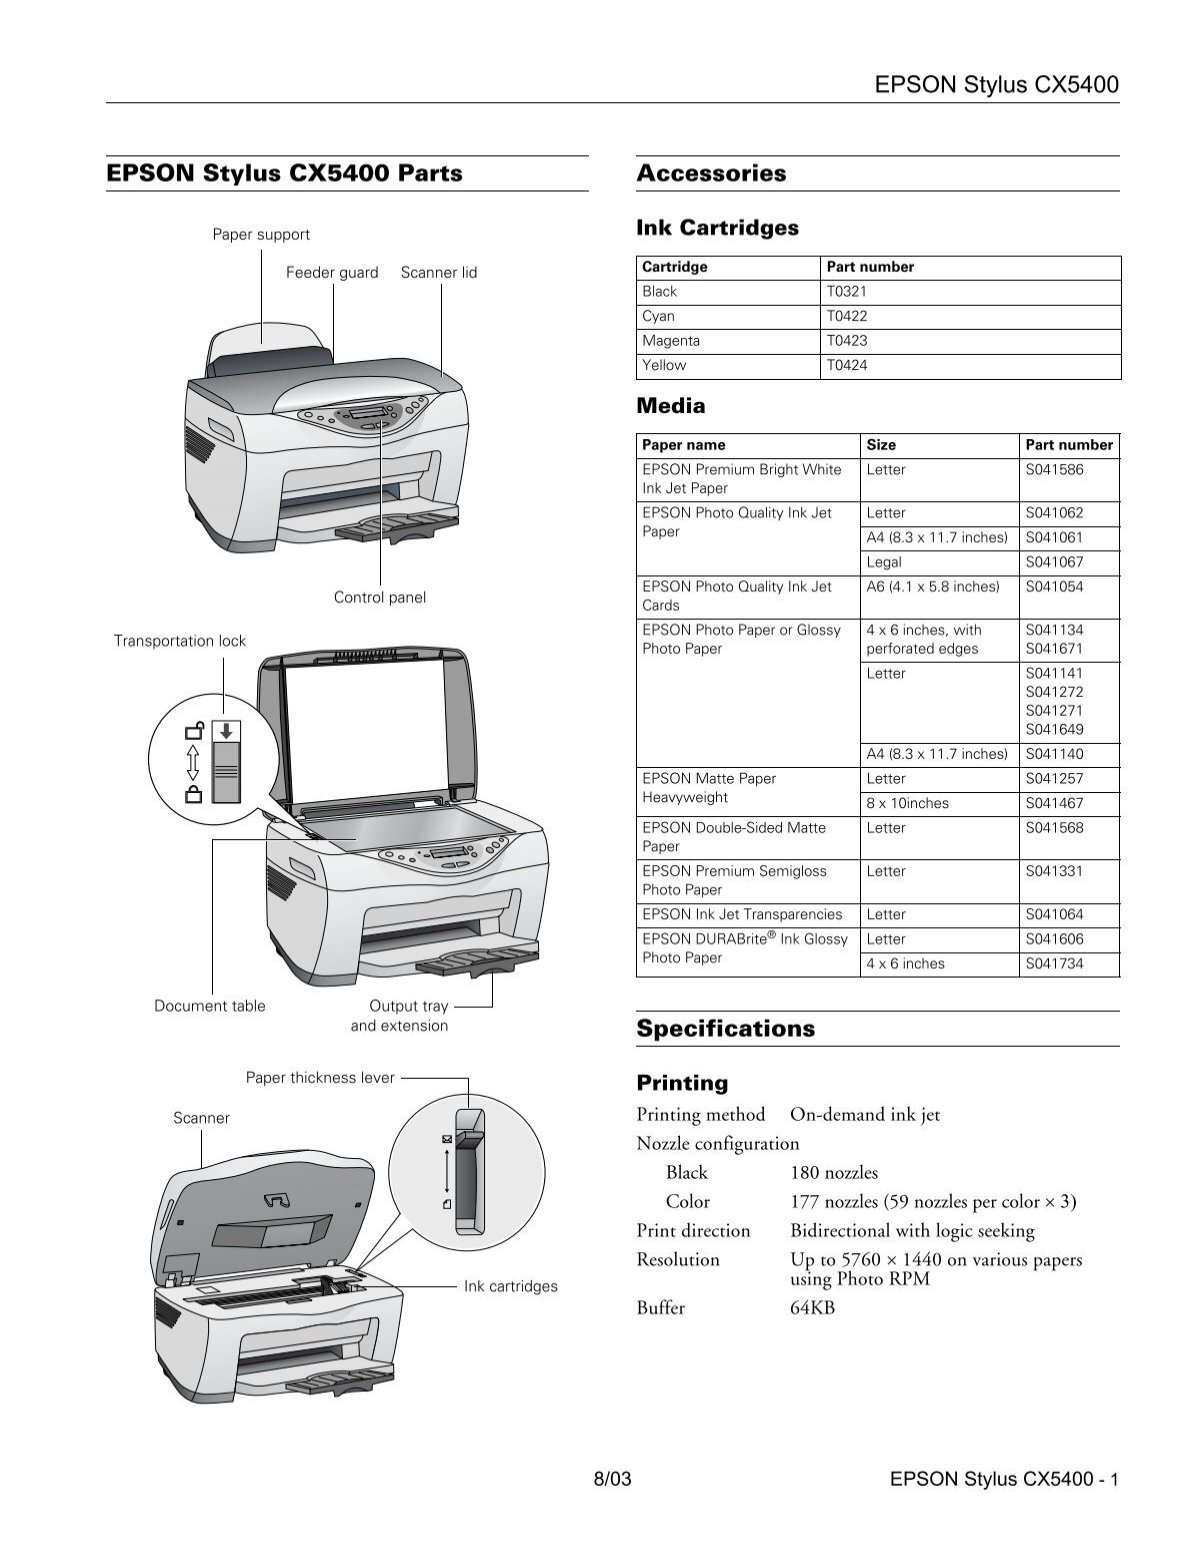 Epson Epson Stylus Cx5400 All In One Printer Product Information Guide 7974